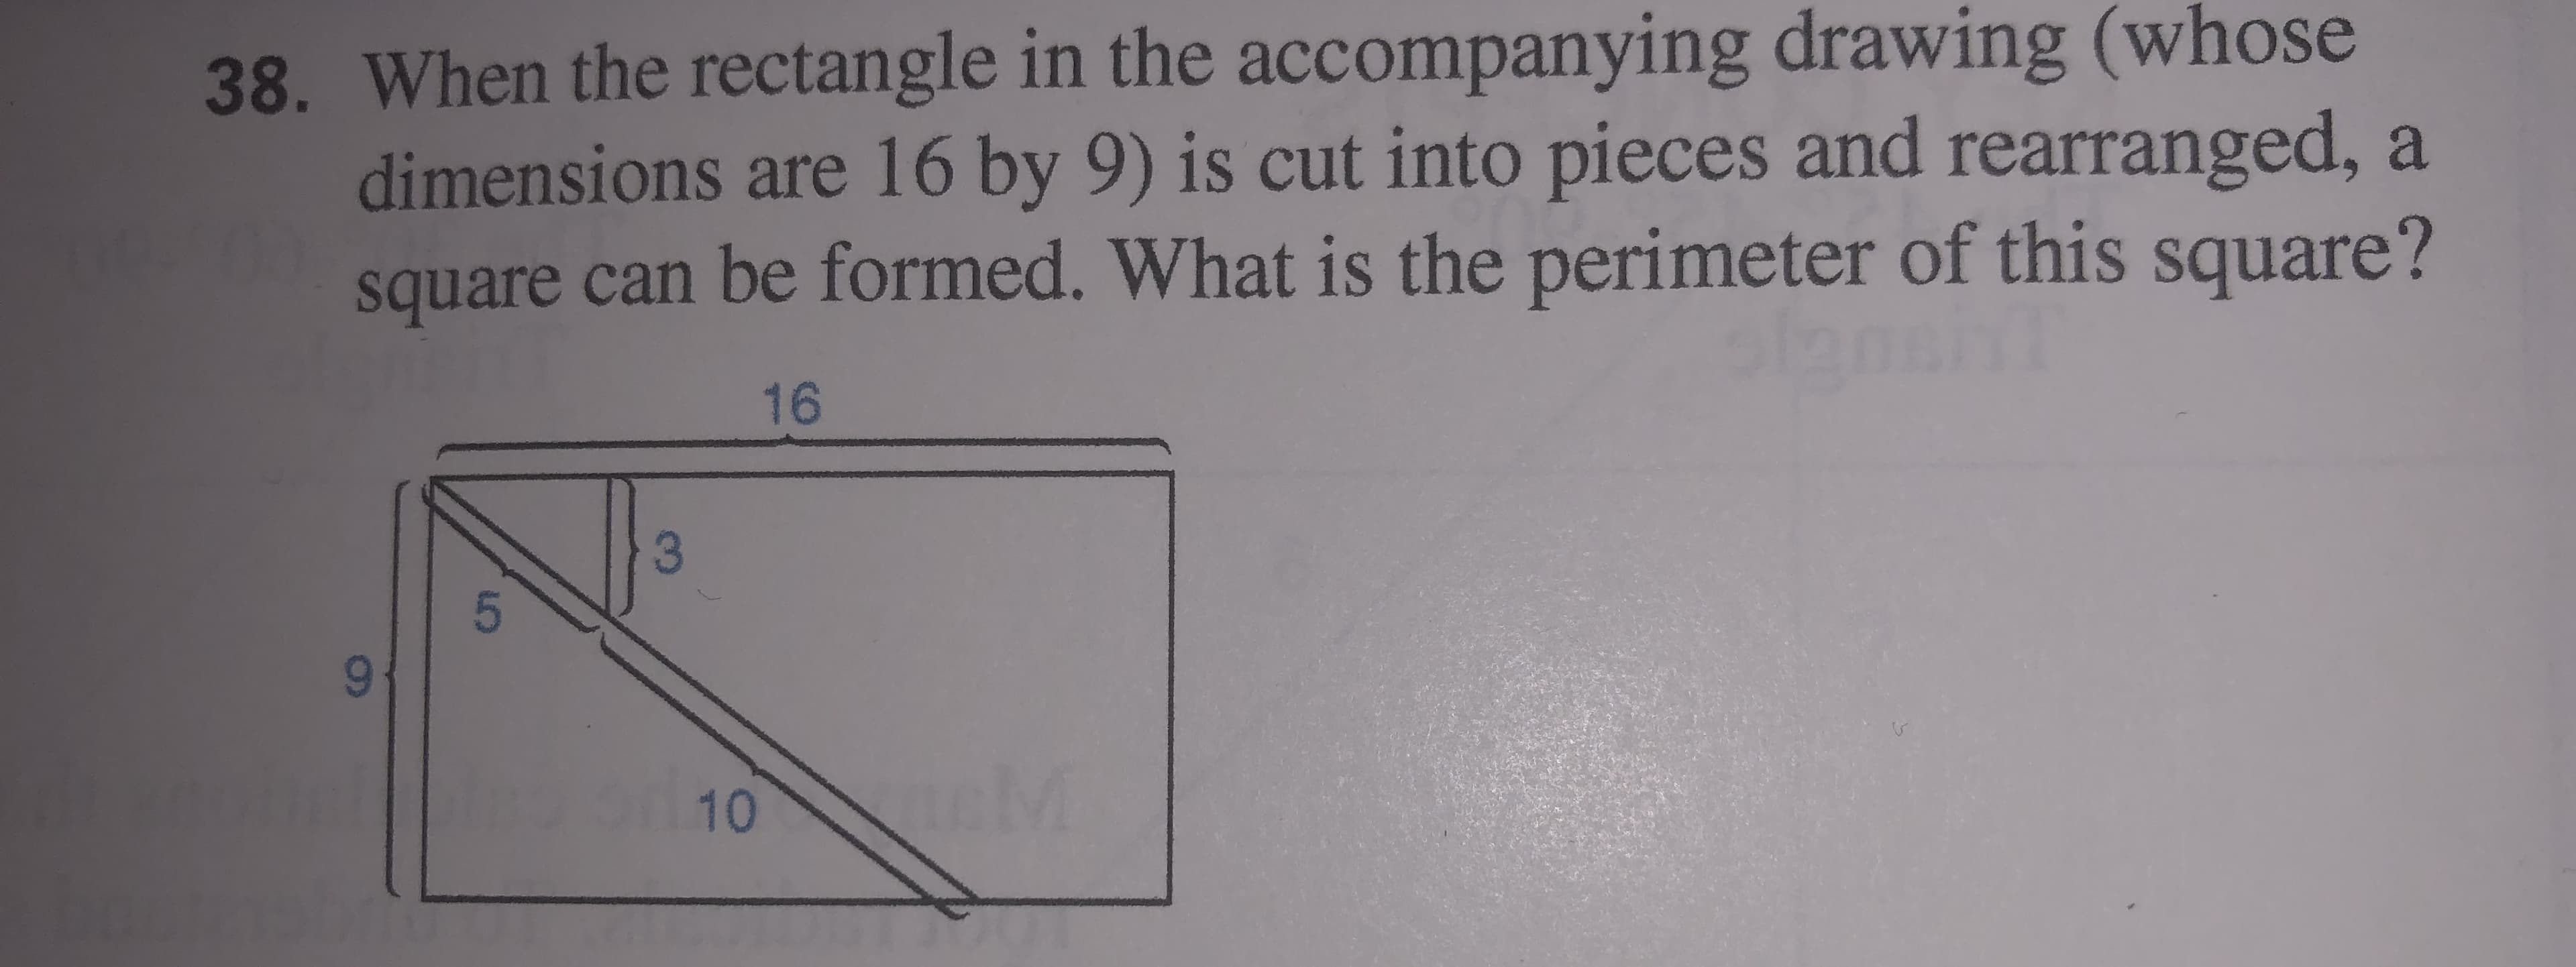 38. When the rectangle in the accompanying drawing (whose
dimensions are 16 by 9) is cut into pieces and rearranged, a
square can be formed. What is the perimeter of this square?
16
96-
10 M
